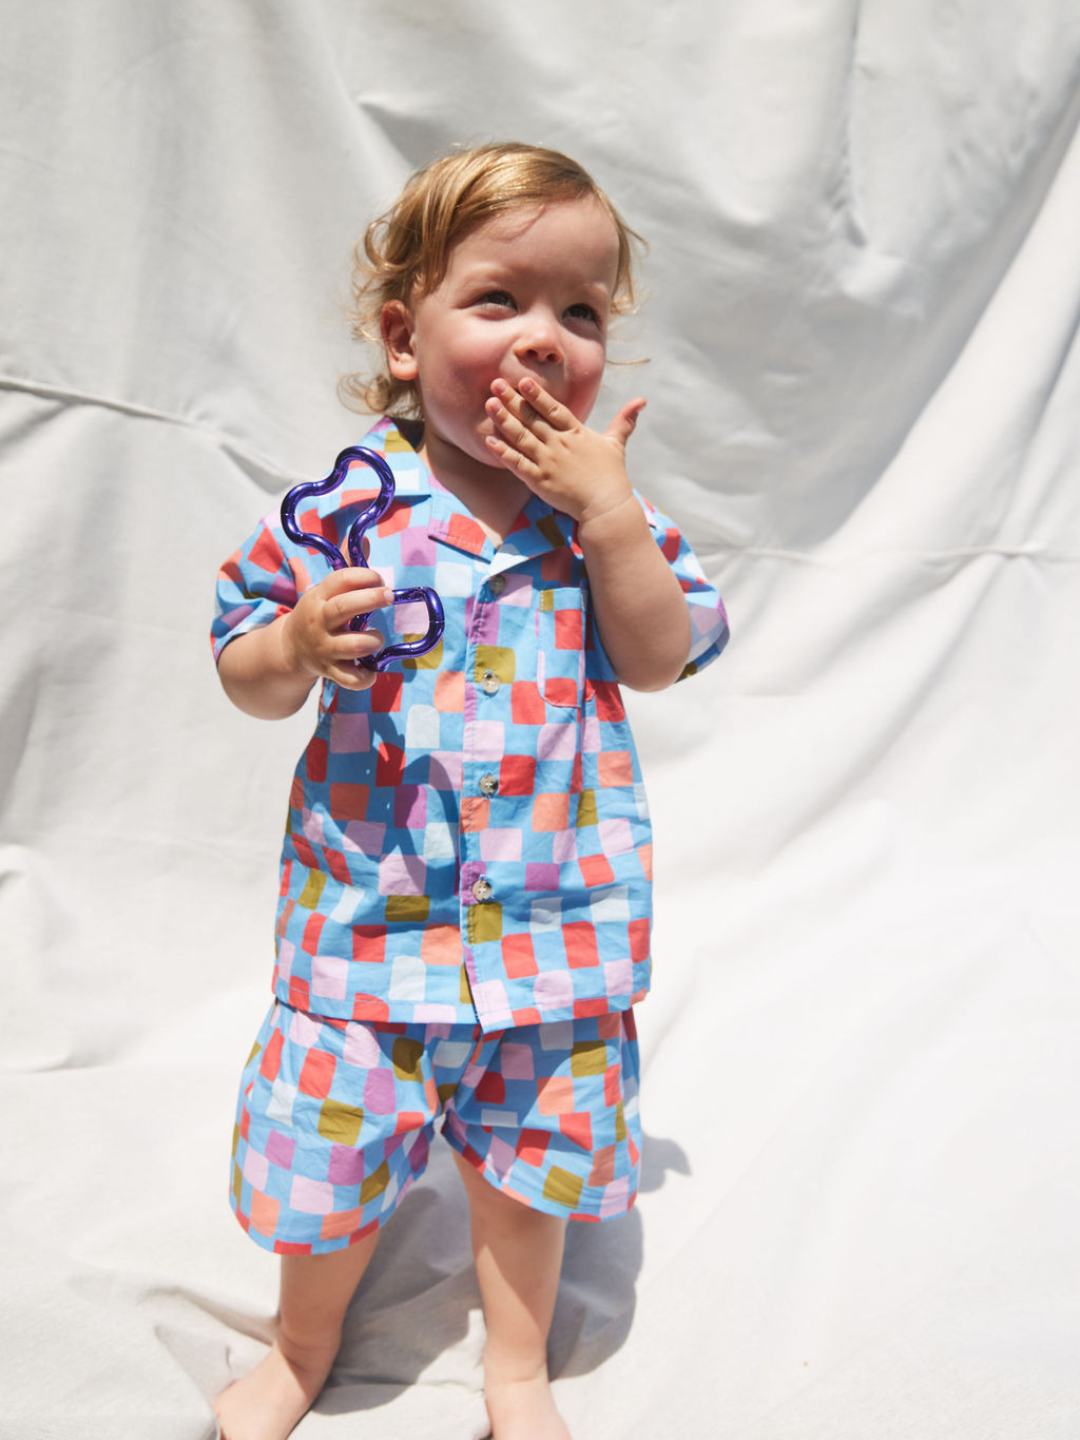 A toddler wearing a kids' shirt and shorts set in a pattern of red, orange, pink, lilac and green squares on a blue background